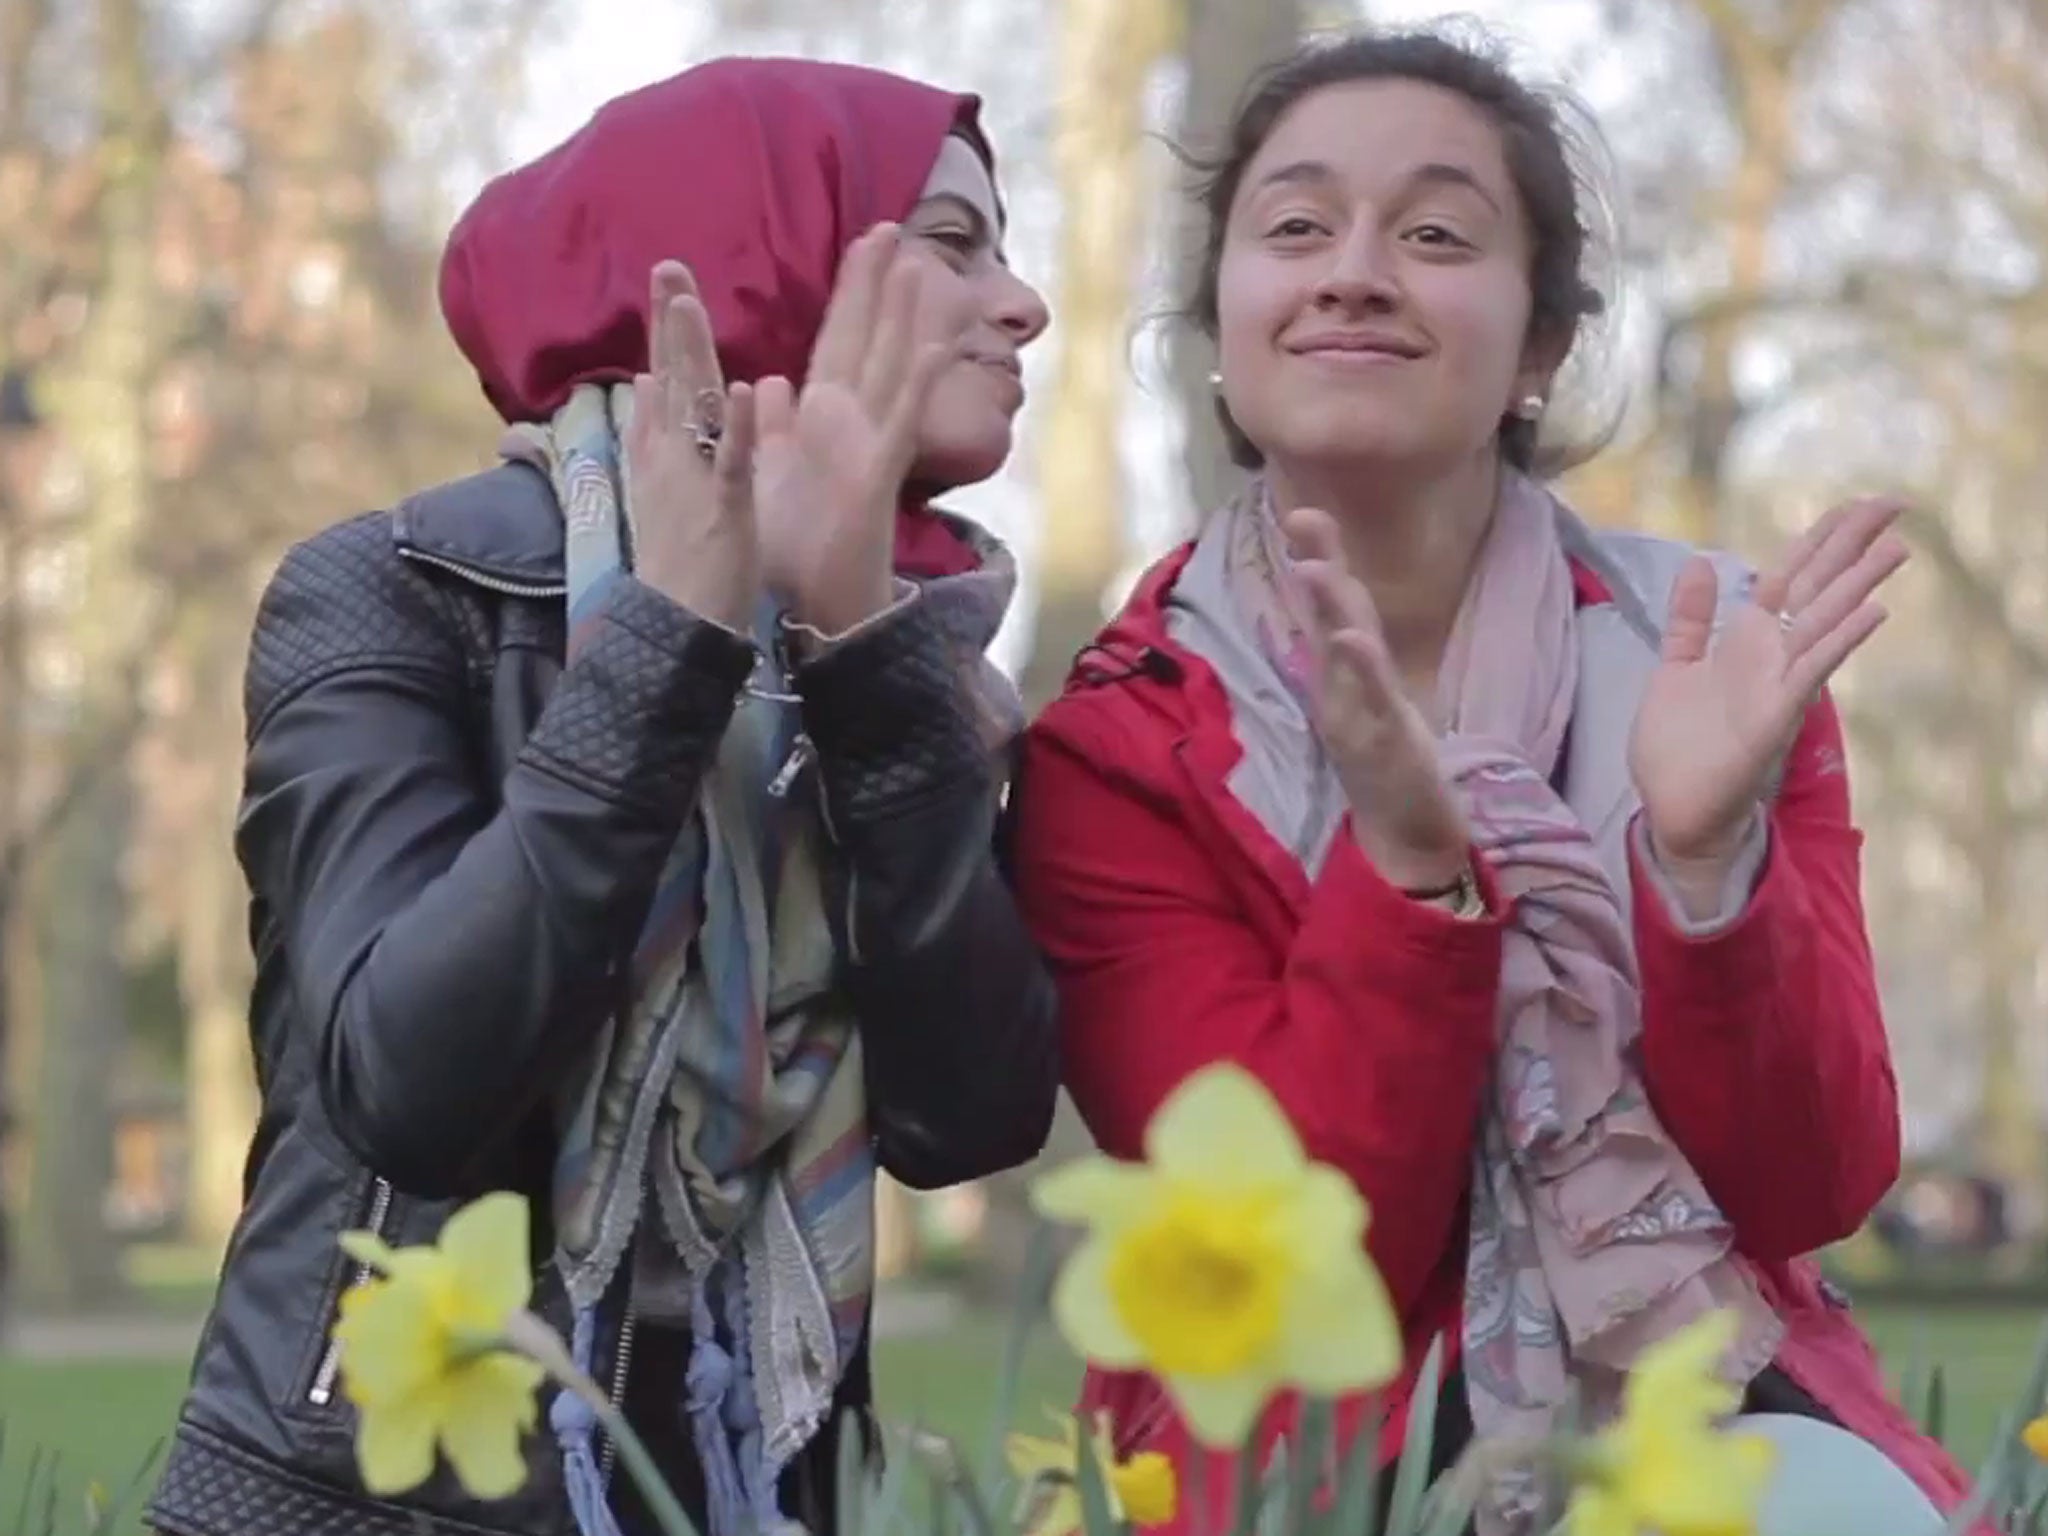 Two young British Muslims dance in The Honesty Policy's 'Happy' video